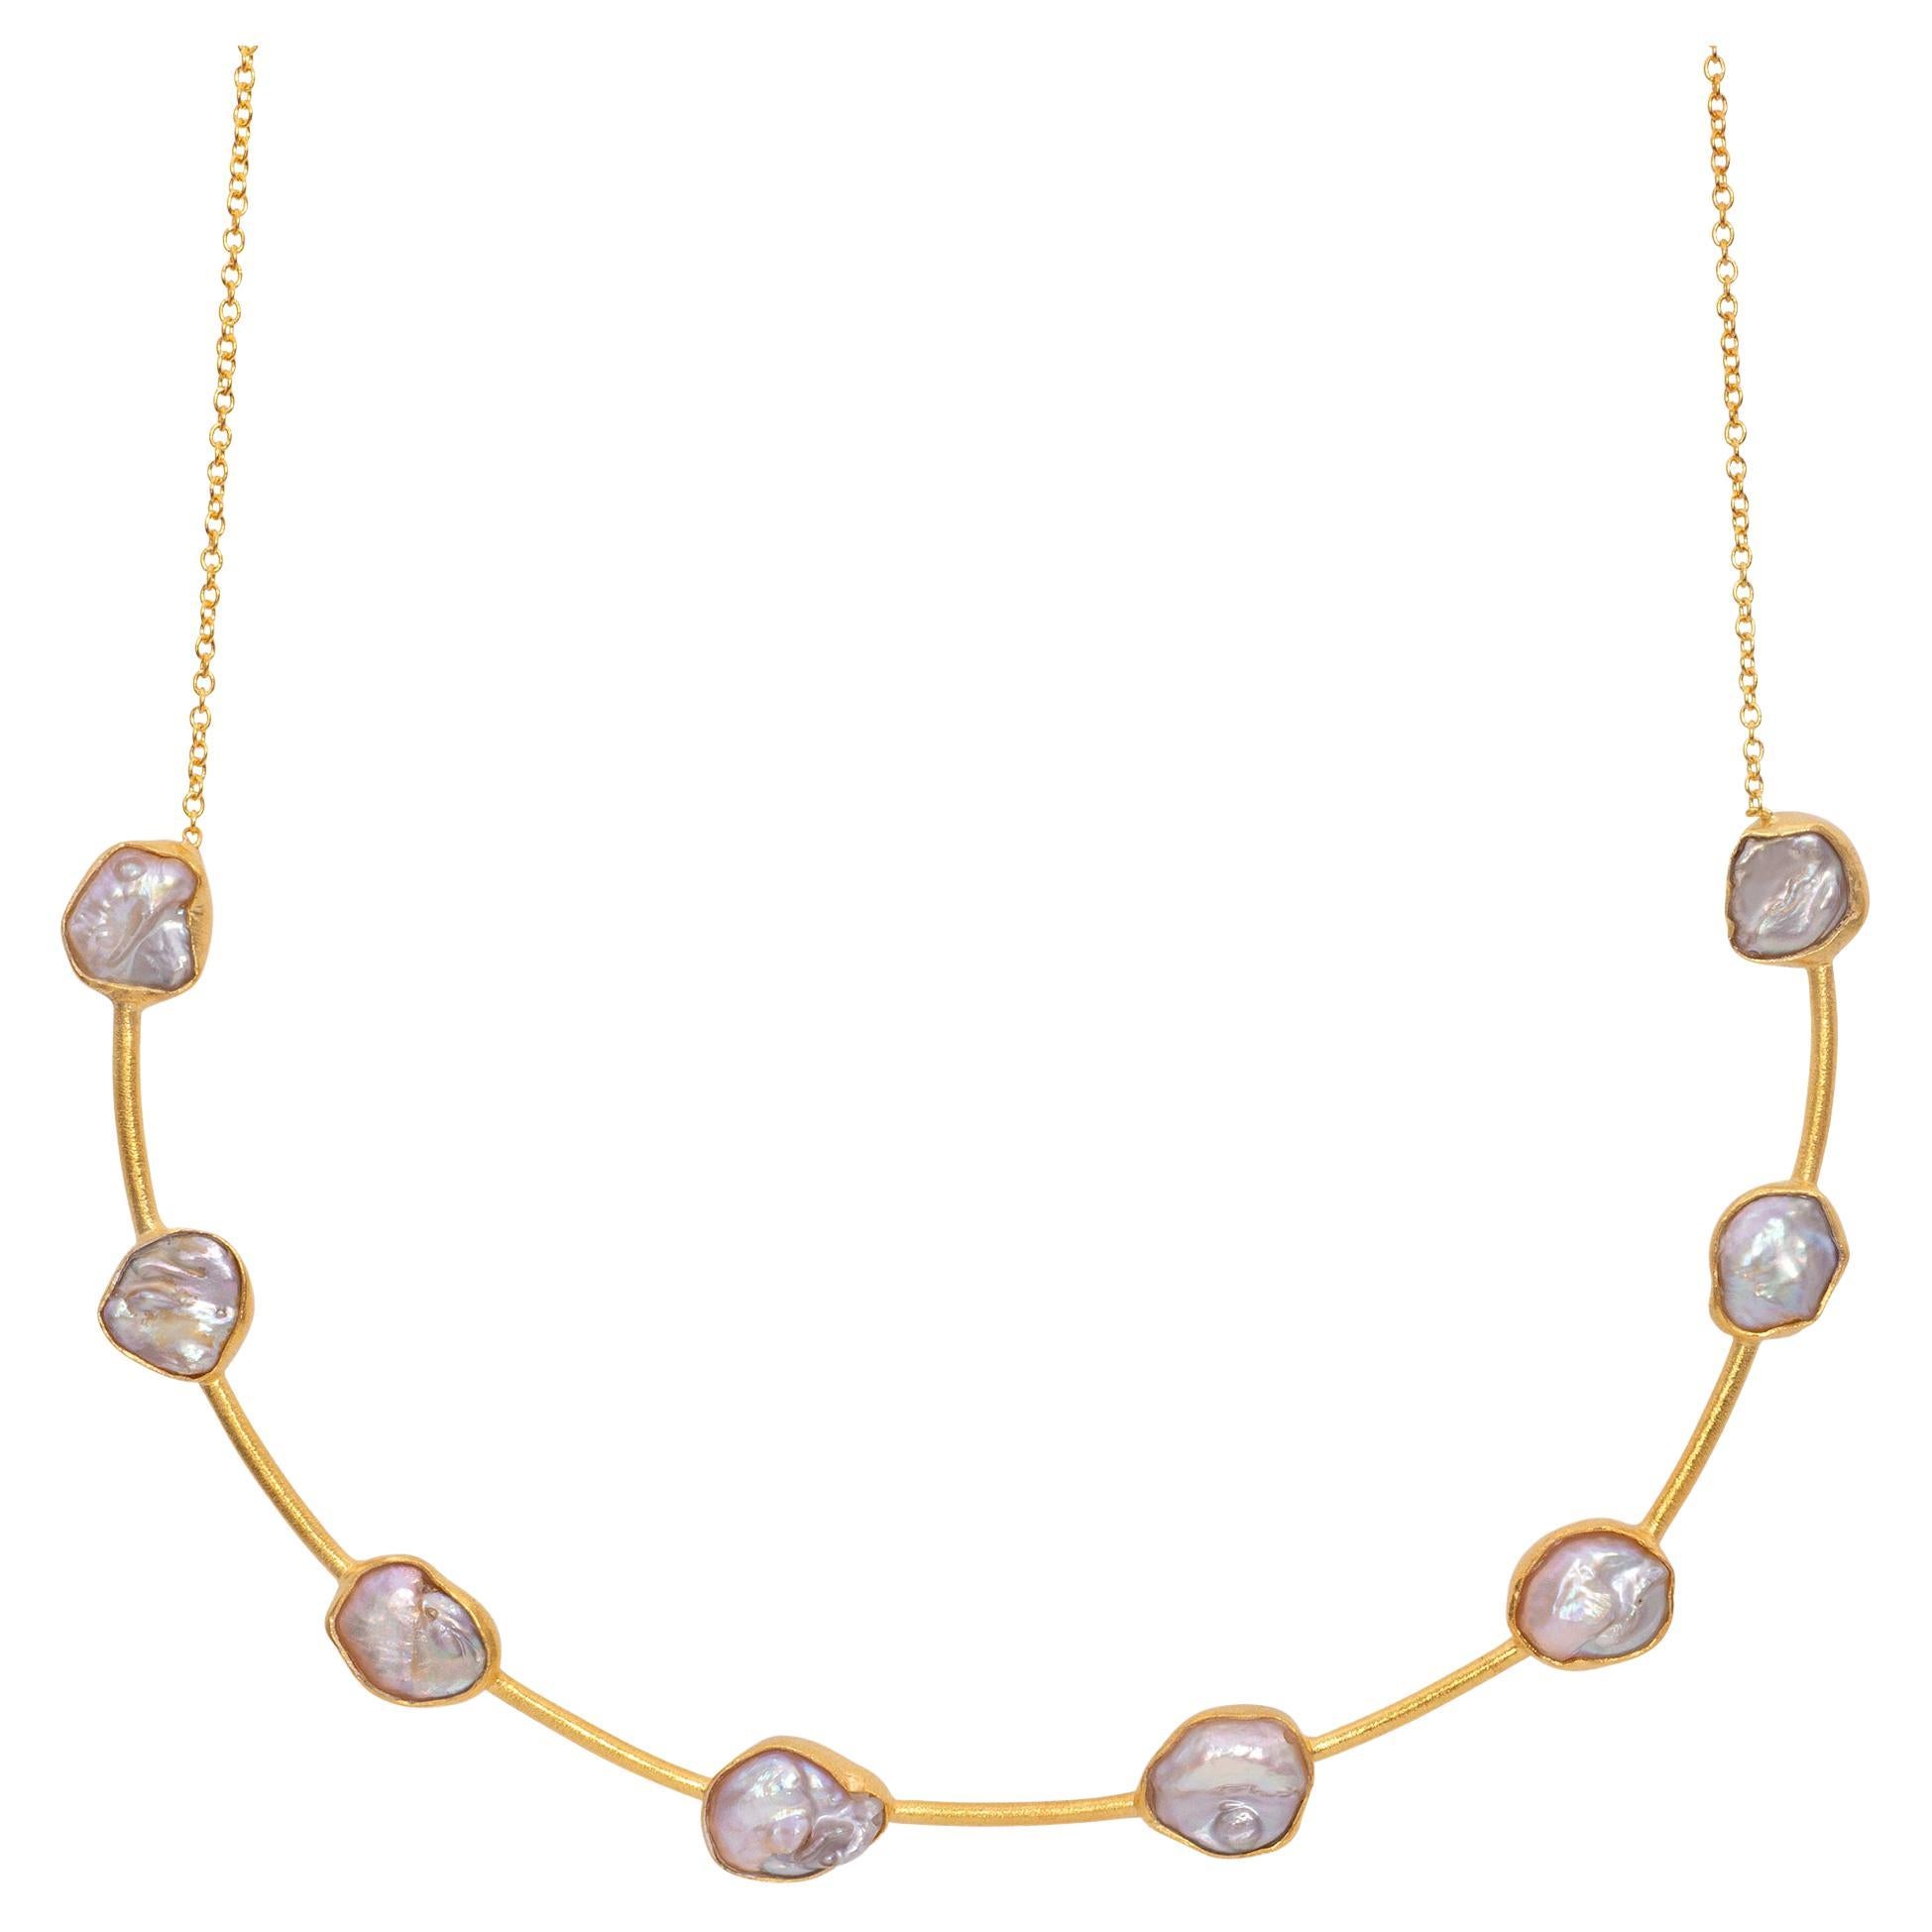 Another unique Merideth McGregor designed item. This April in Paris Designs Gold Vermeil Golden Amber Choker Necklace is an elegant piece to enhance your wardrobe. The necklace measure just under 5 inches across and is adorned with eight stunning